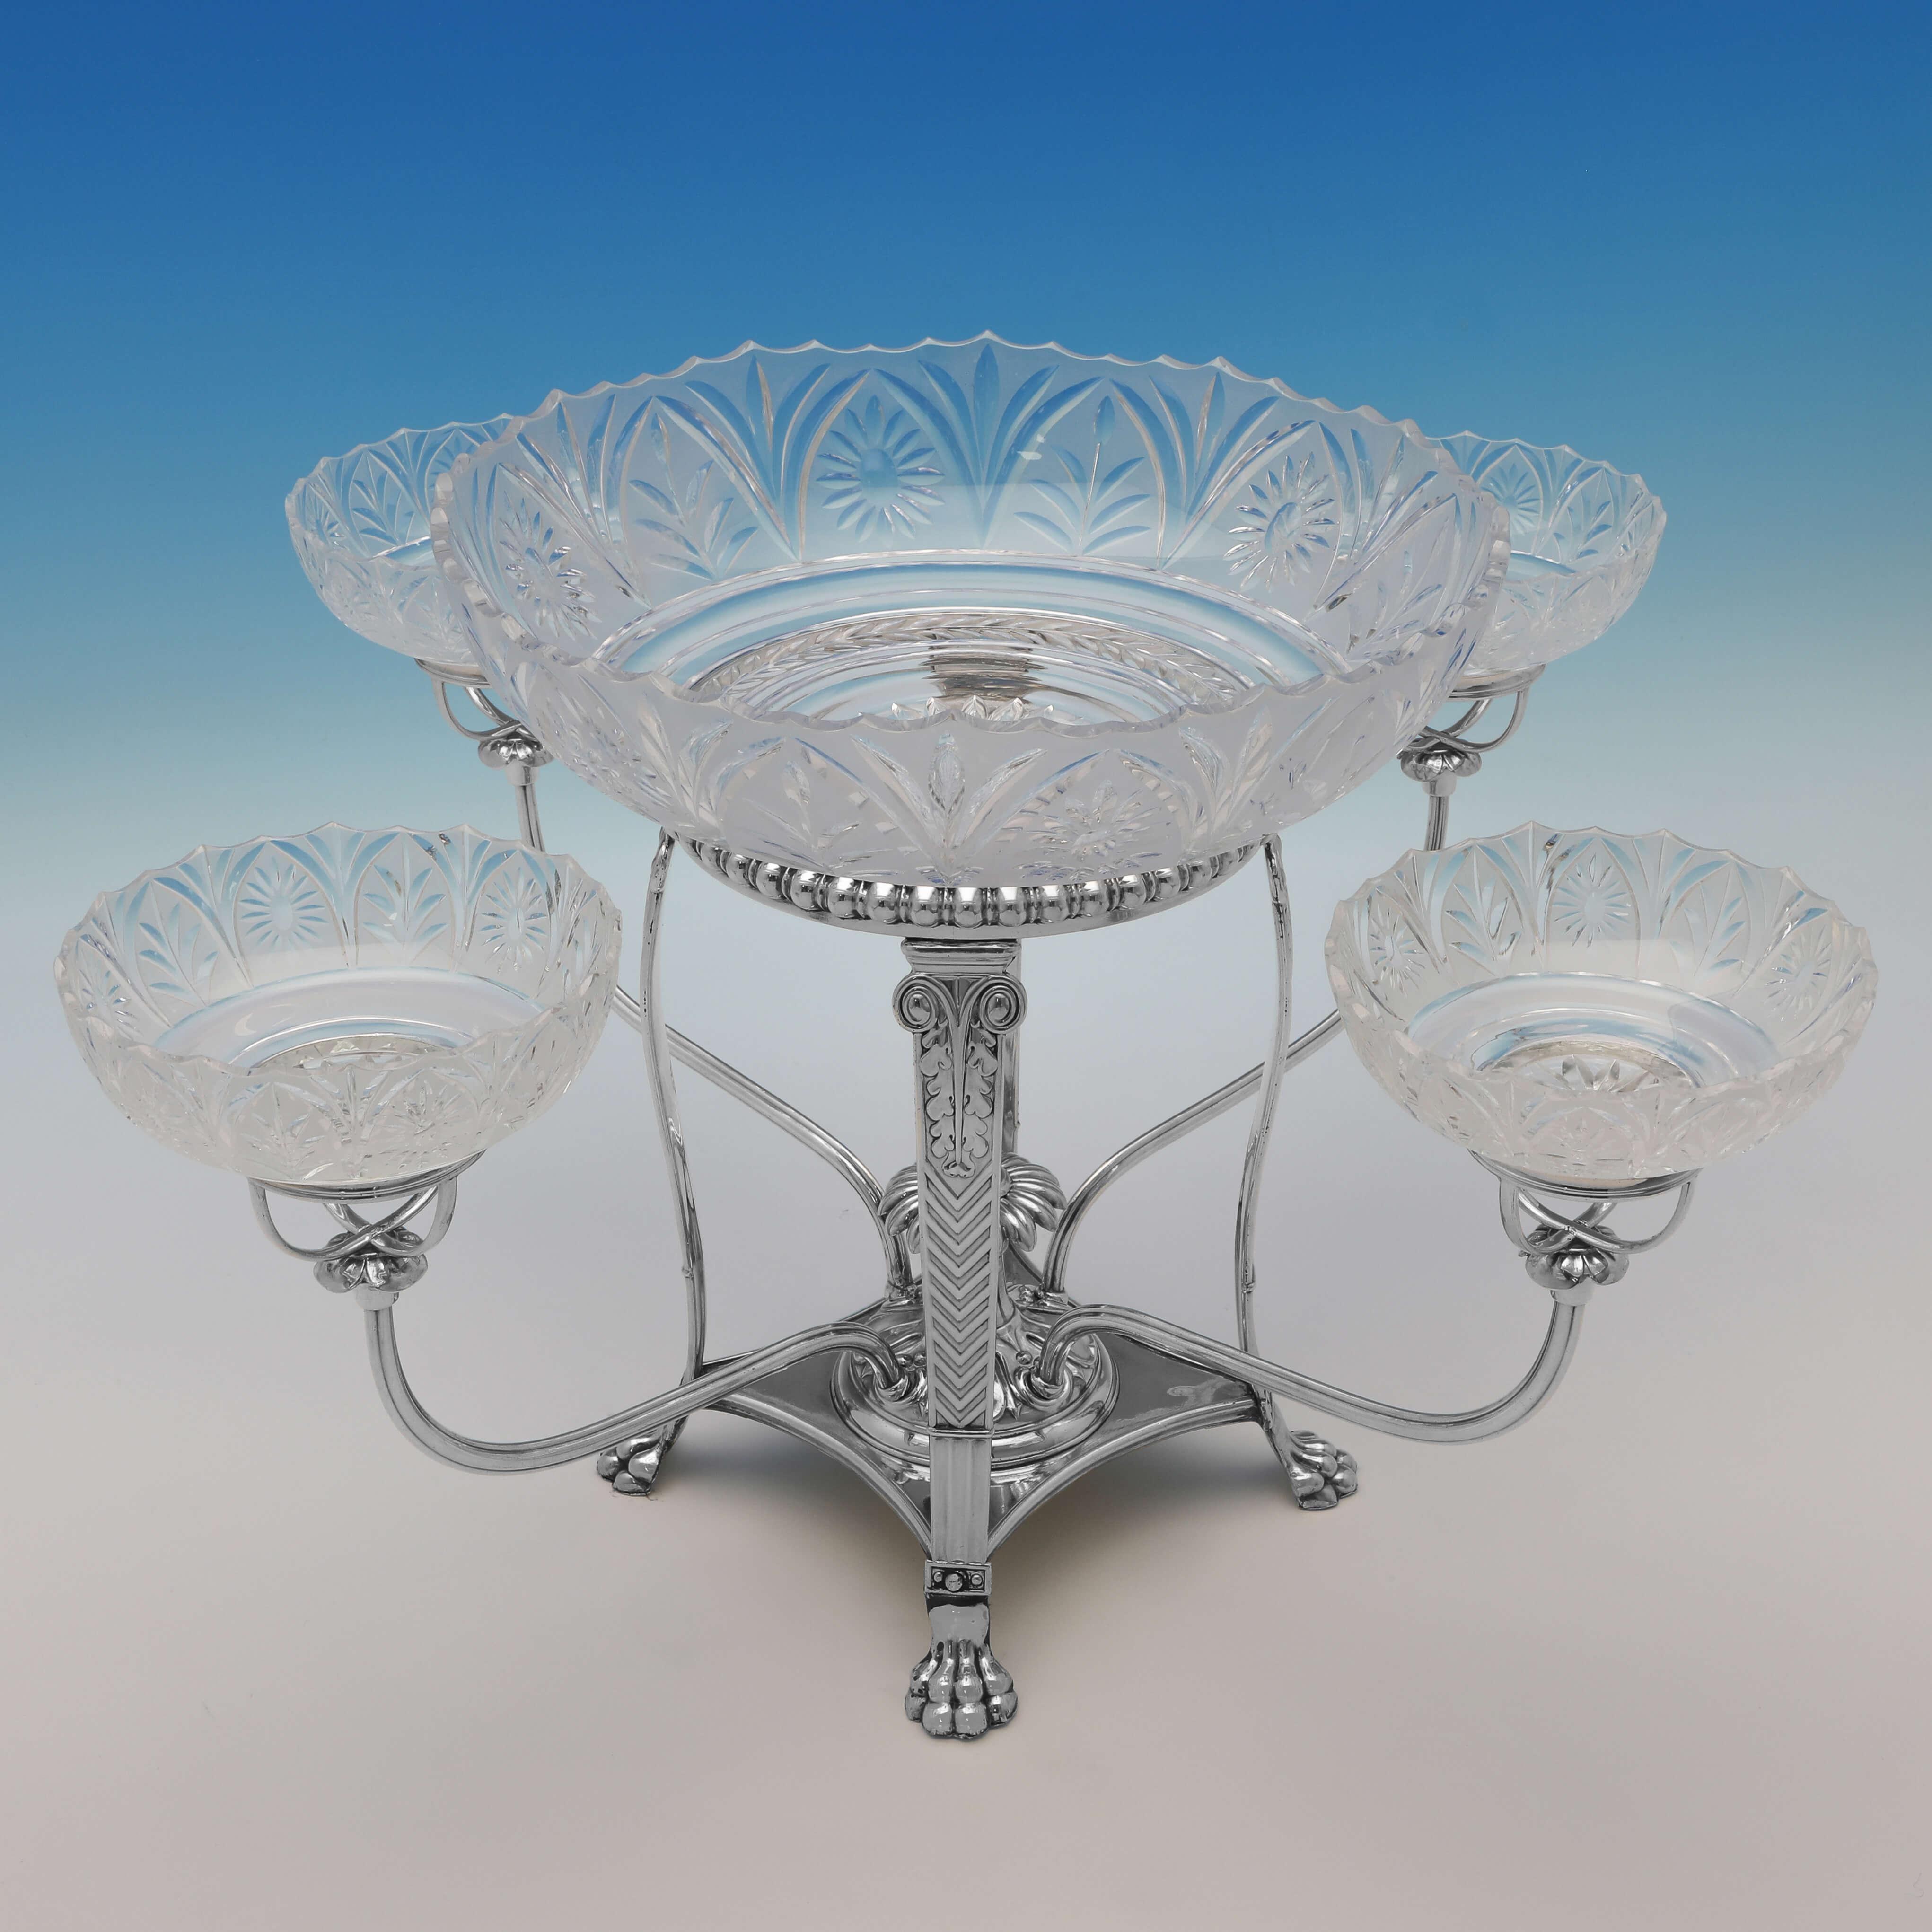 Made circa 1815, this very attractive, Regency Period, Antique Old Sheffield Plate Epergne, features 4 side glass bowls a larger central glass bowl, and an ornate frame. 

The epergne measures 12